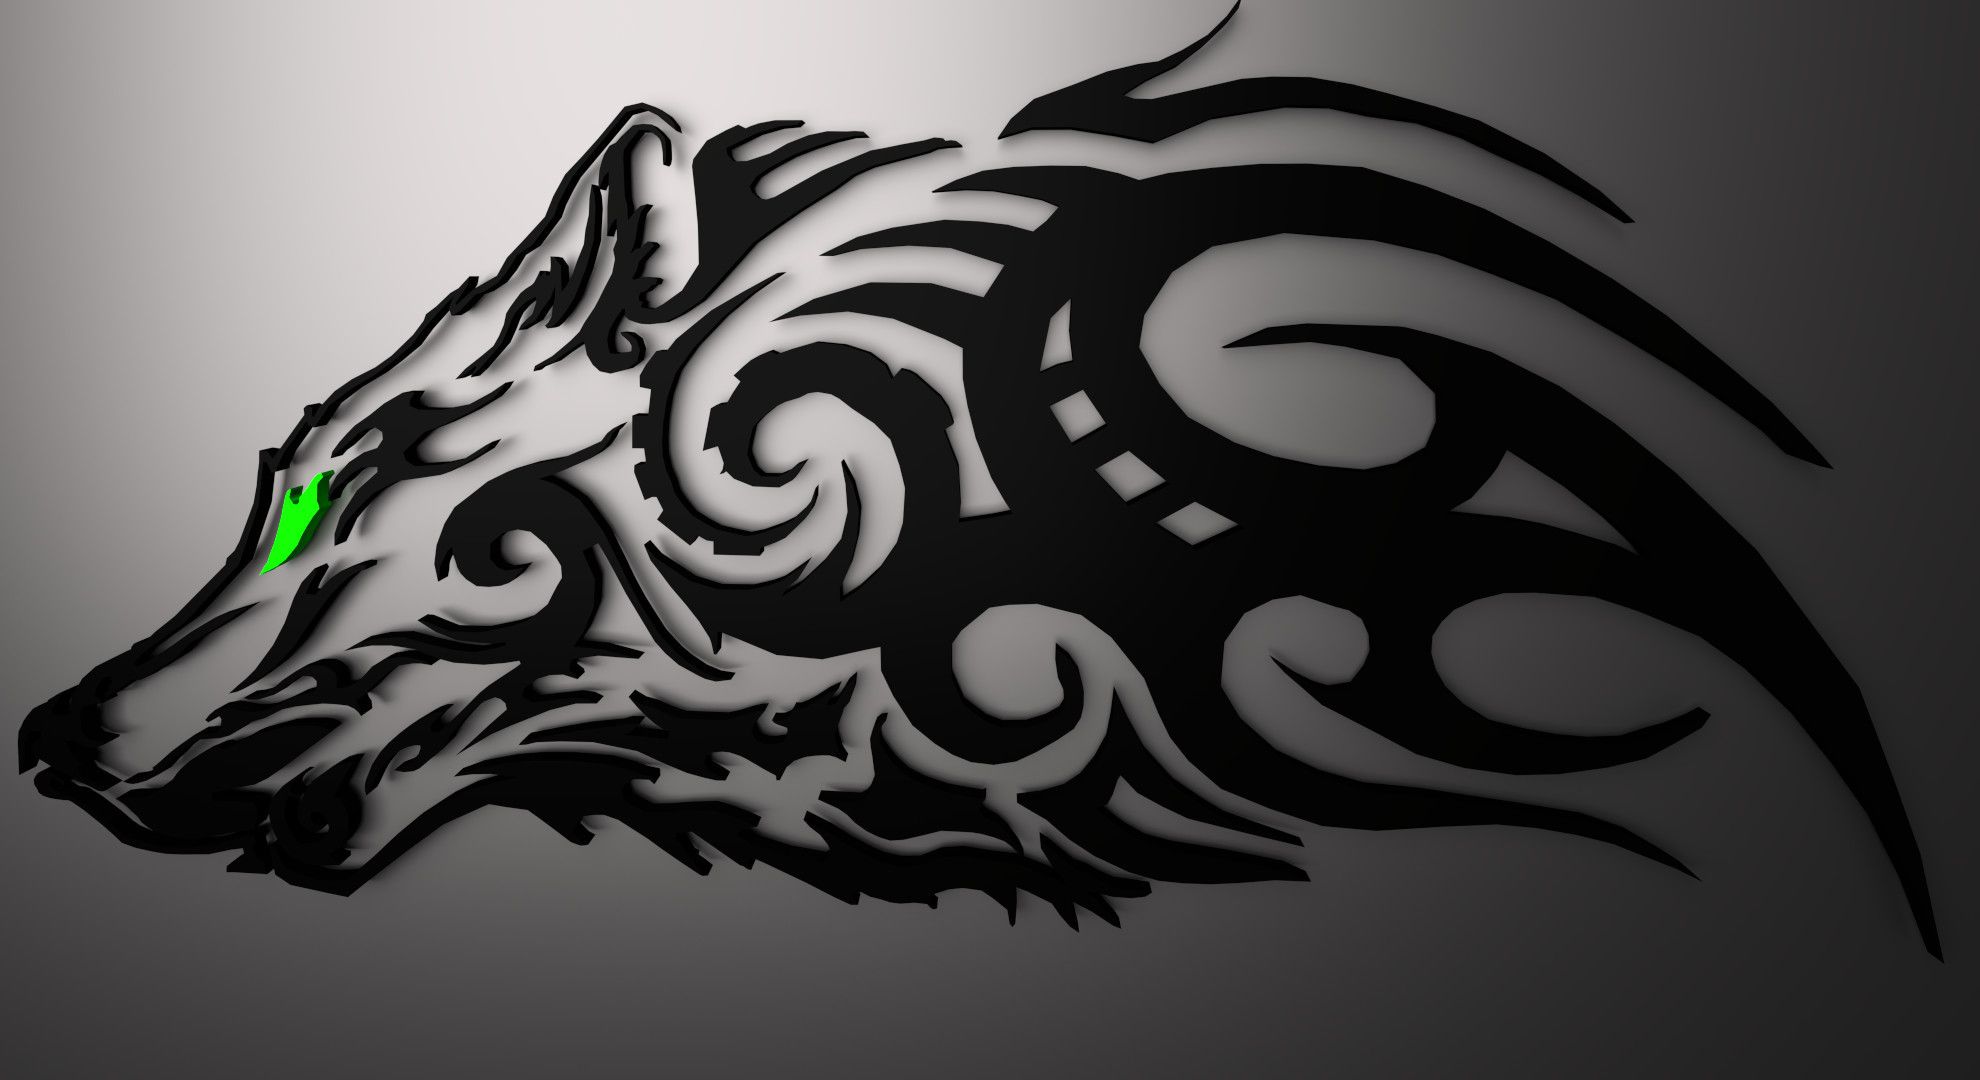 Tribal Wolf Wallpaper Free Tribal Wolf Background